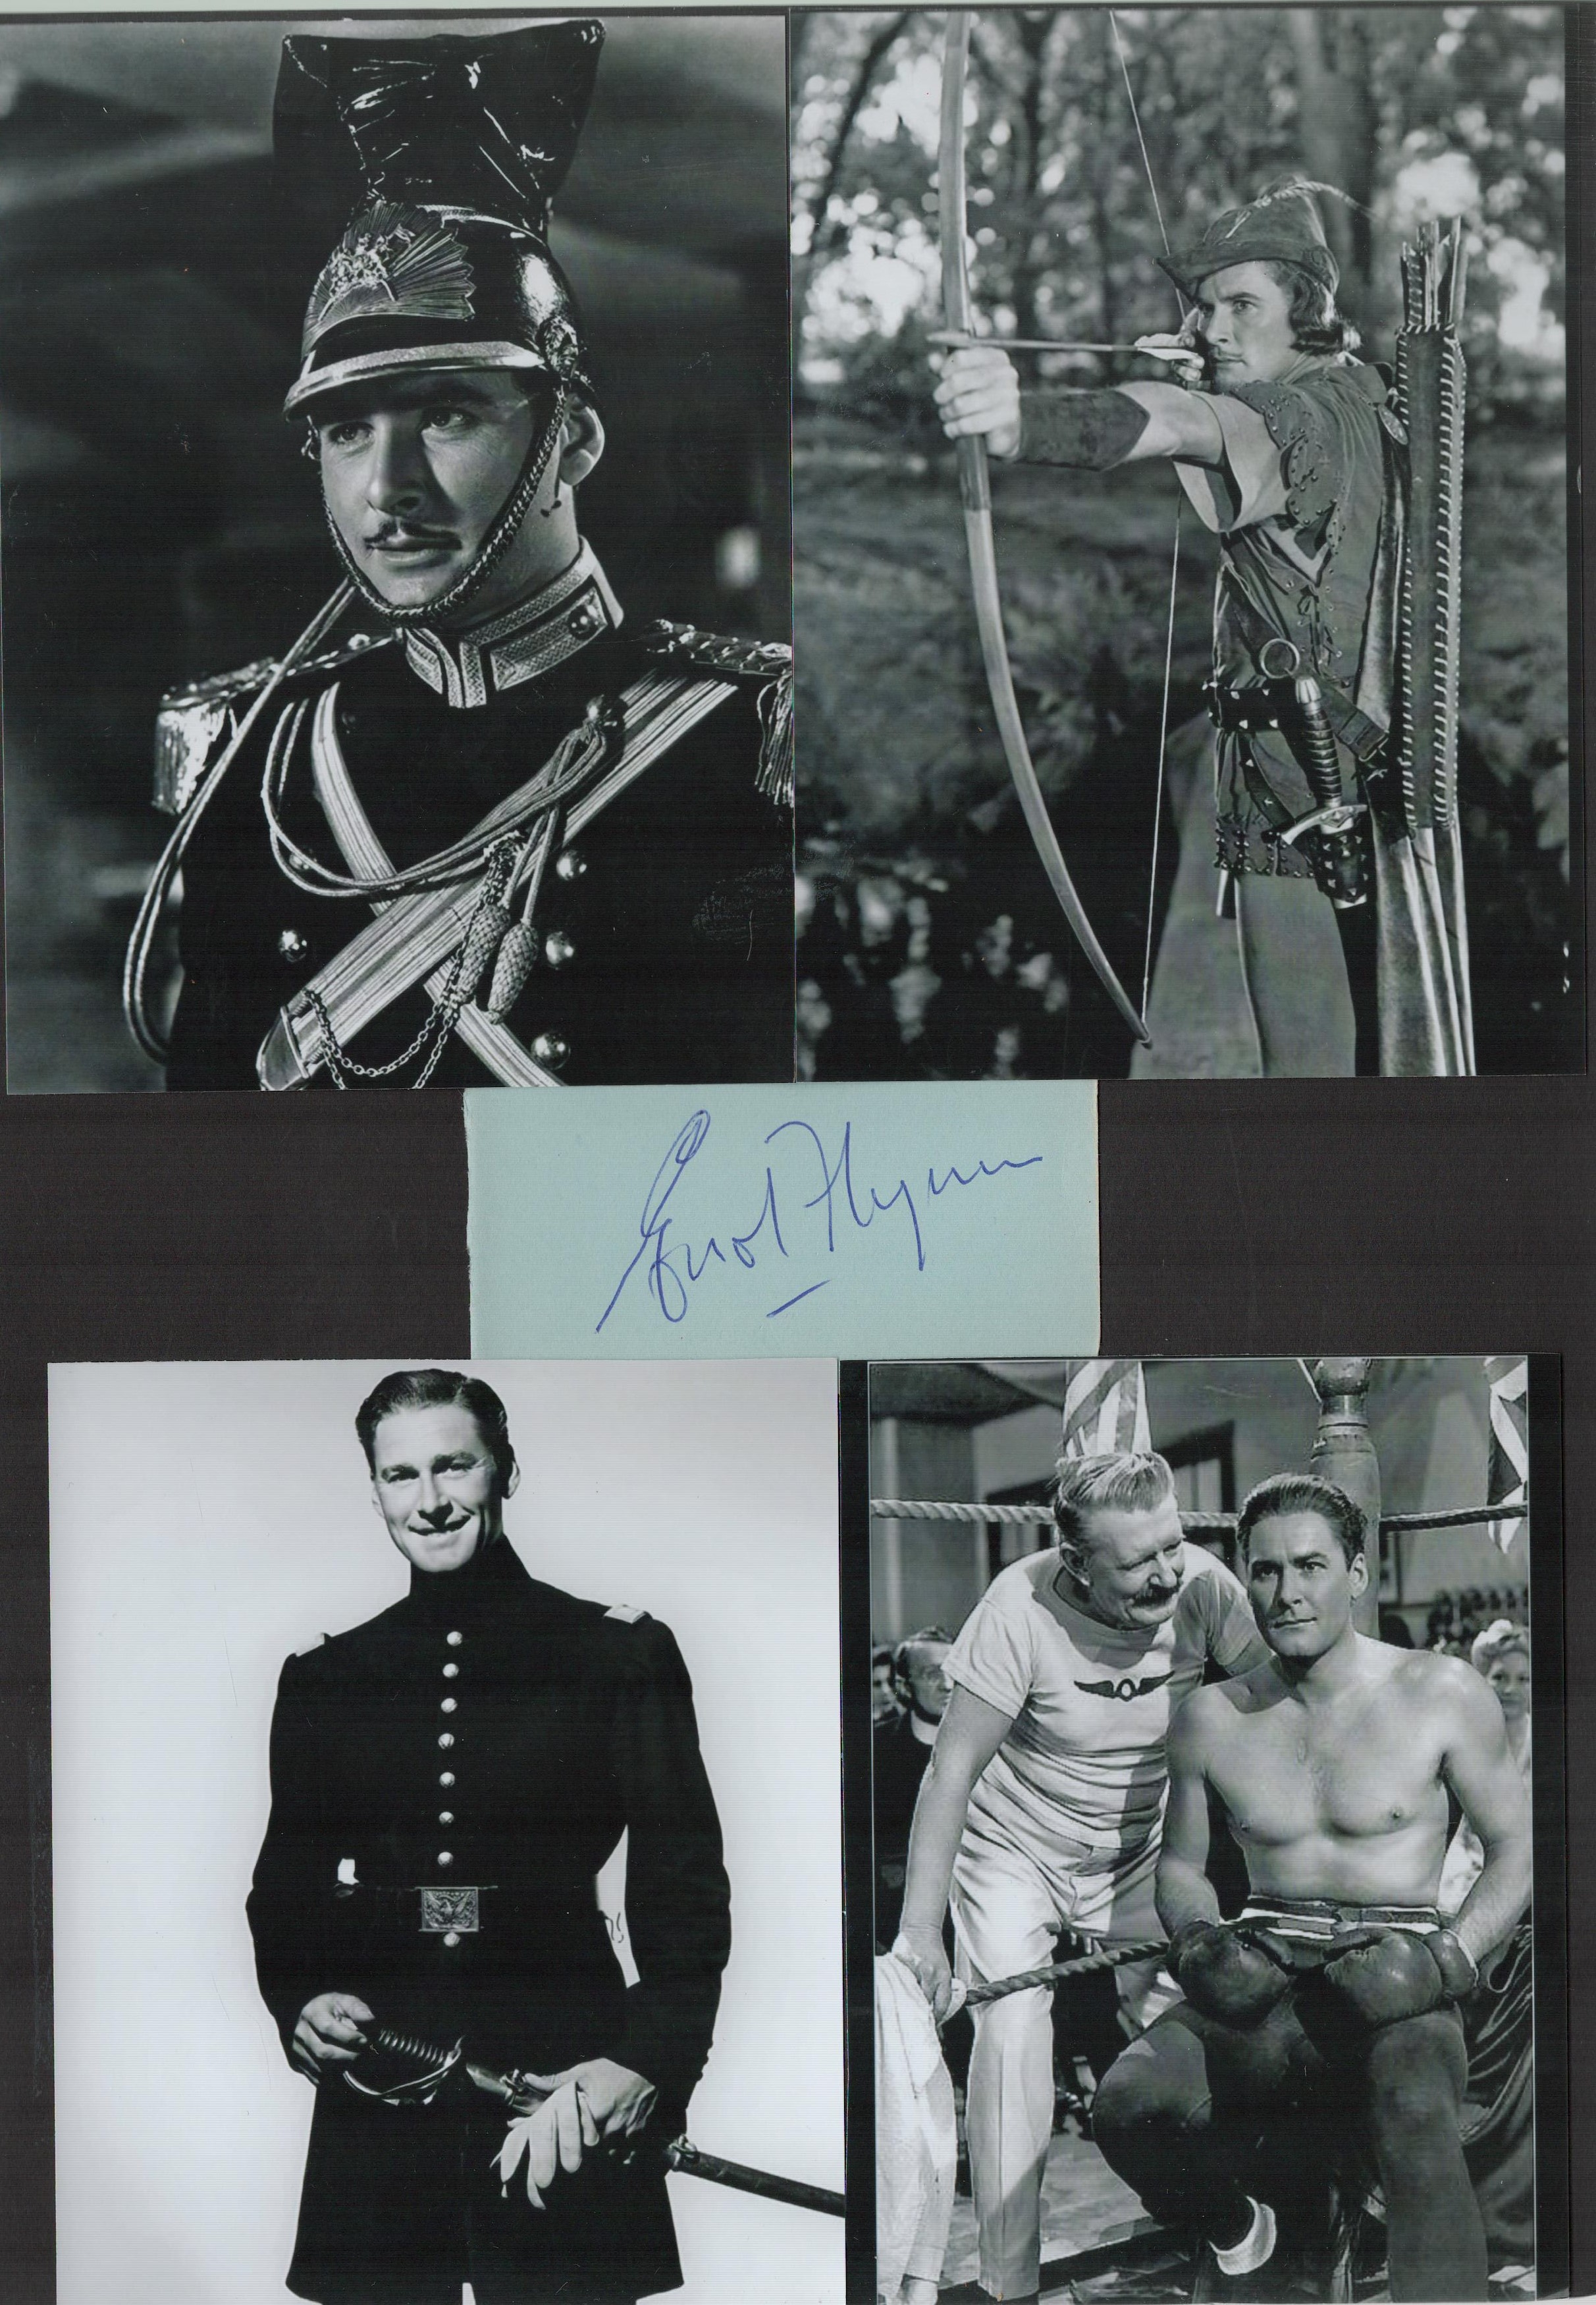 Errol Flynn 12x8 overall signature piece includes signed album page four stunning black and white